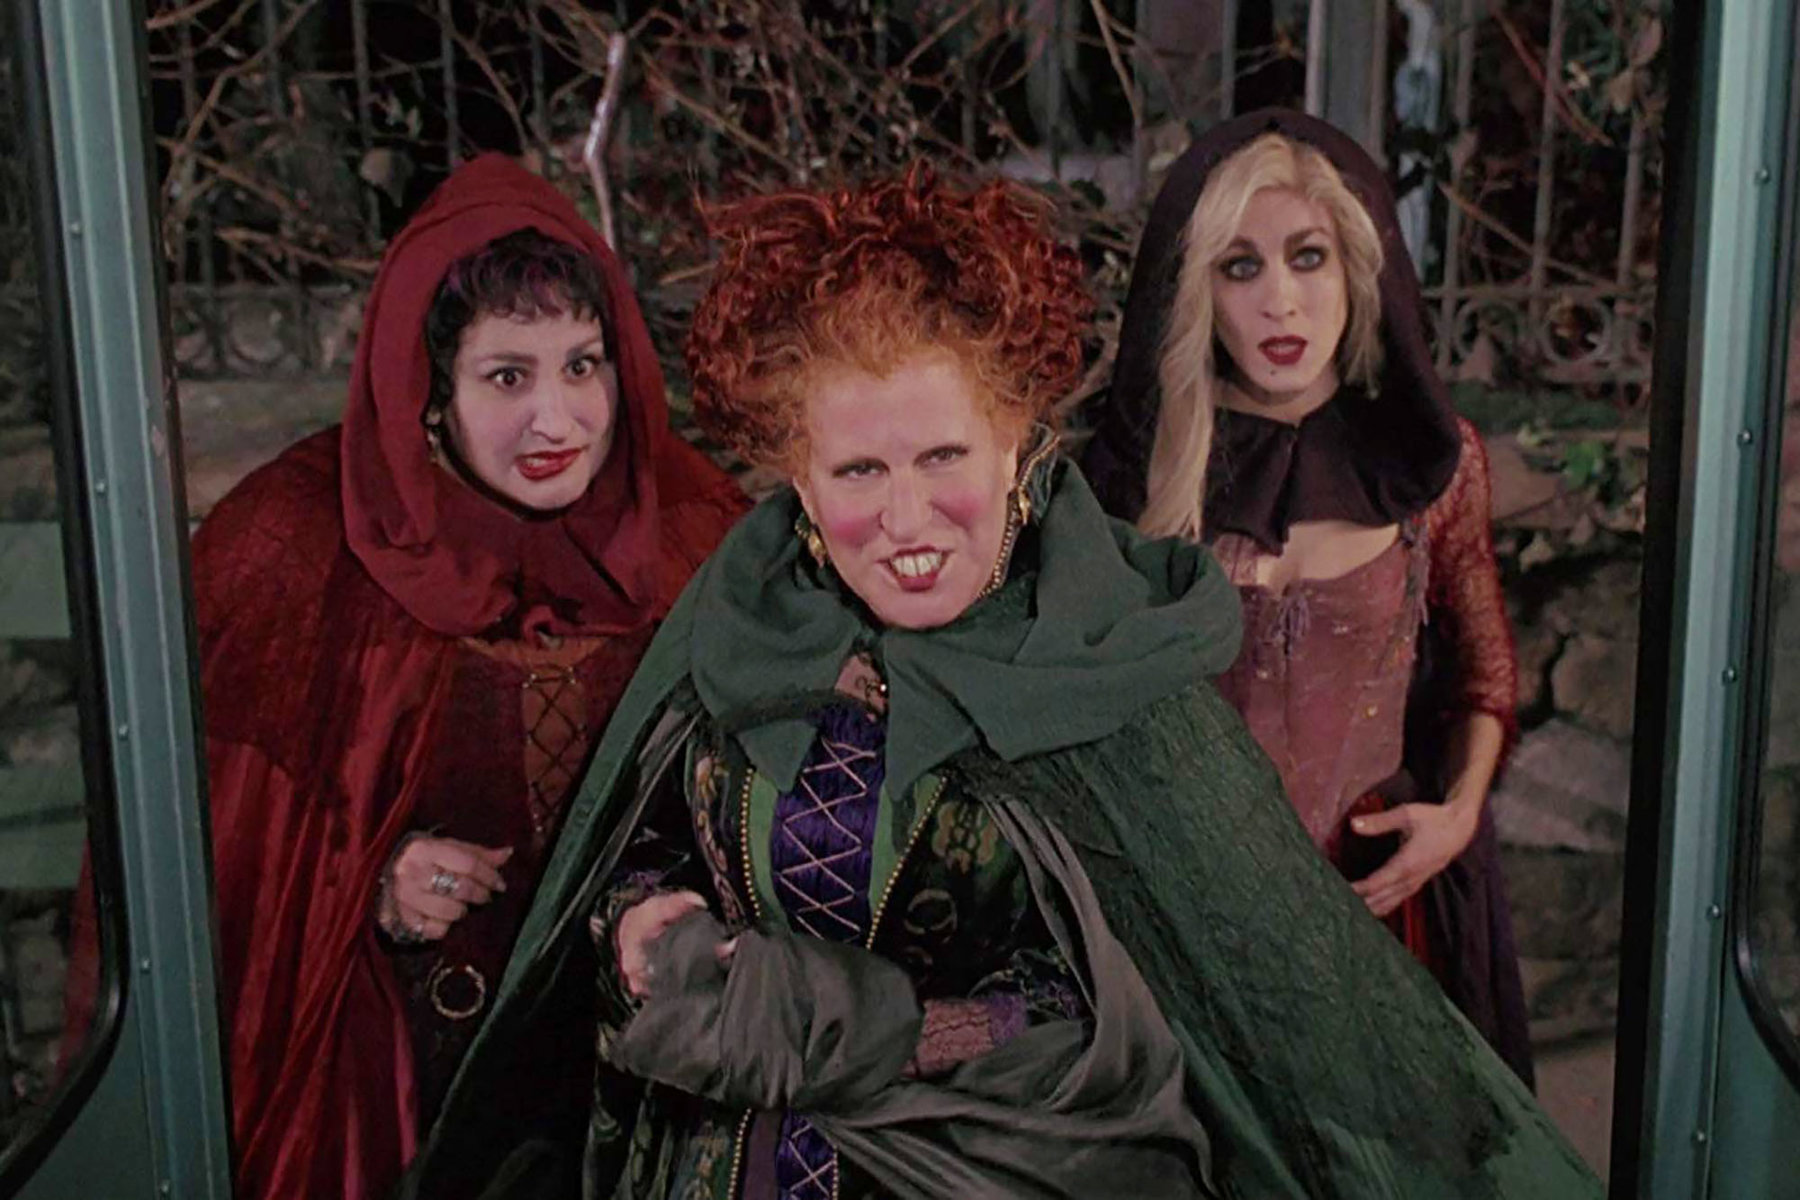 Bette Midler, Kathy Najimy, and Sarah Jessica Parker as the Sanderson sisters in Hocus Pocus.